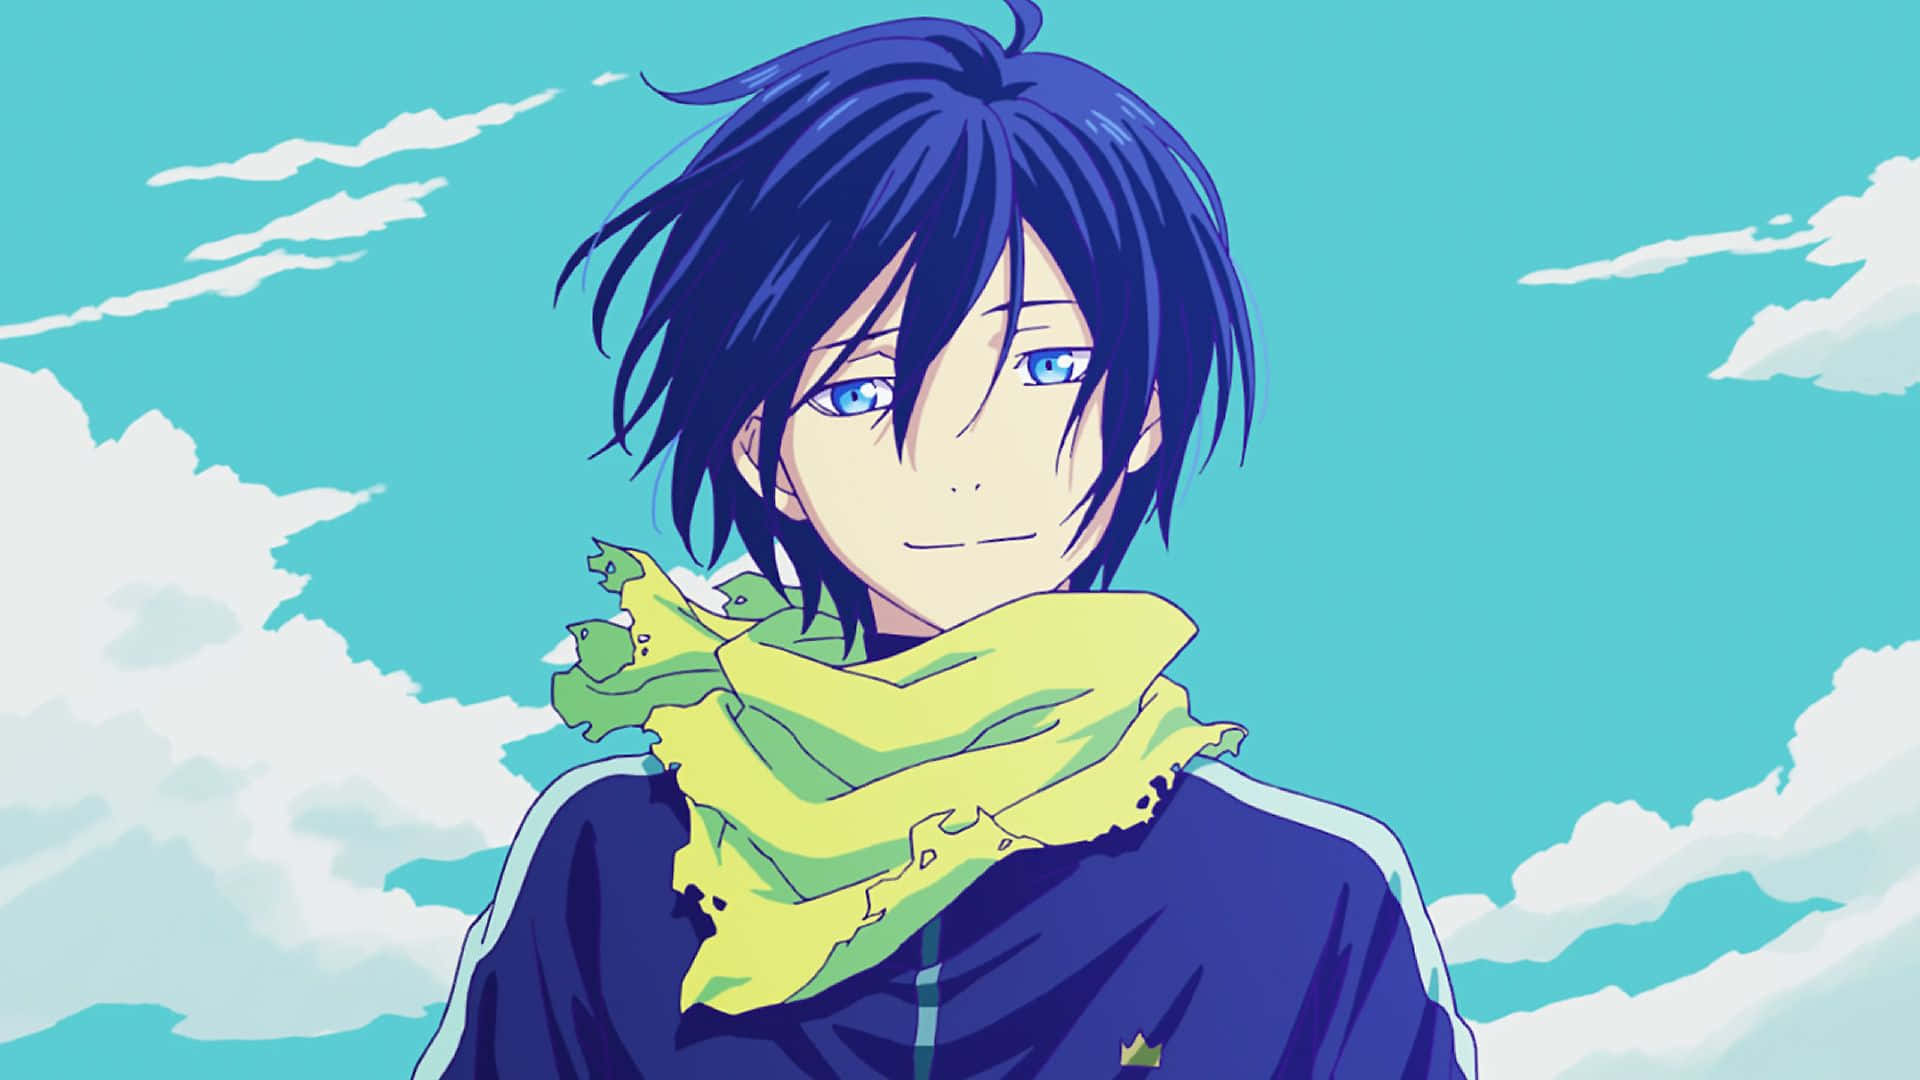 Unlock the secrets of Noragami with Yato and his divine gang